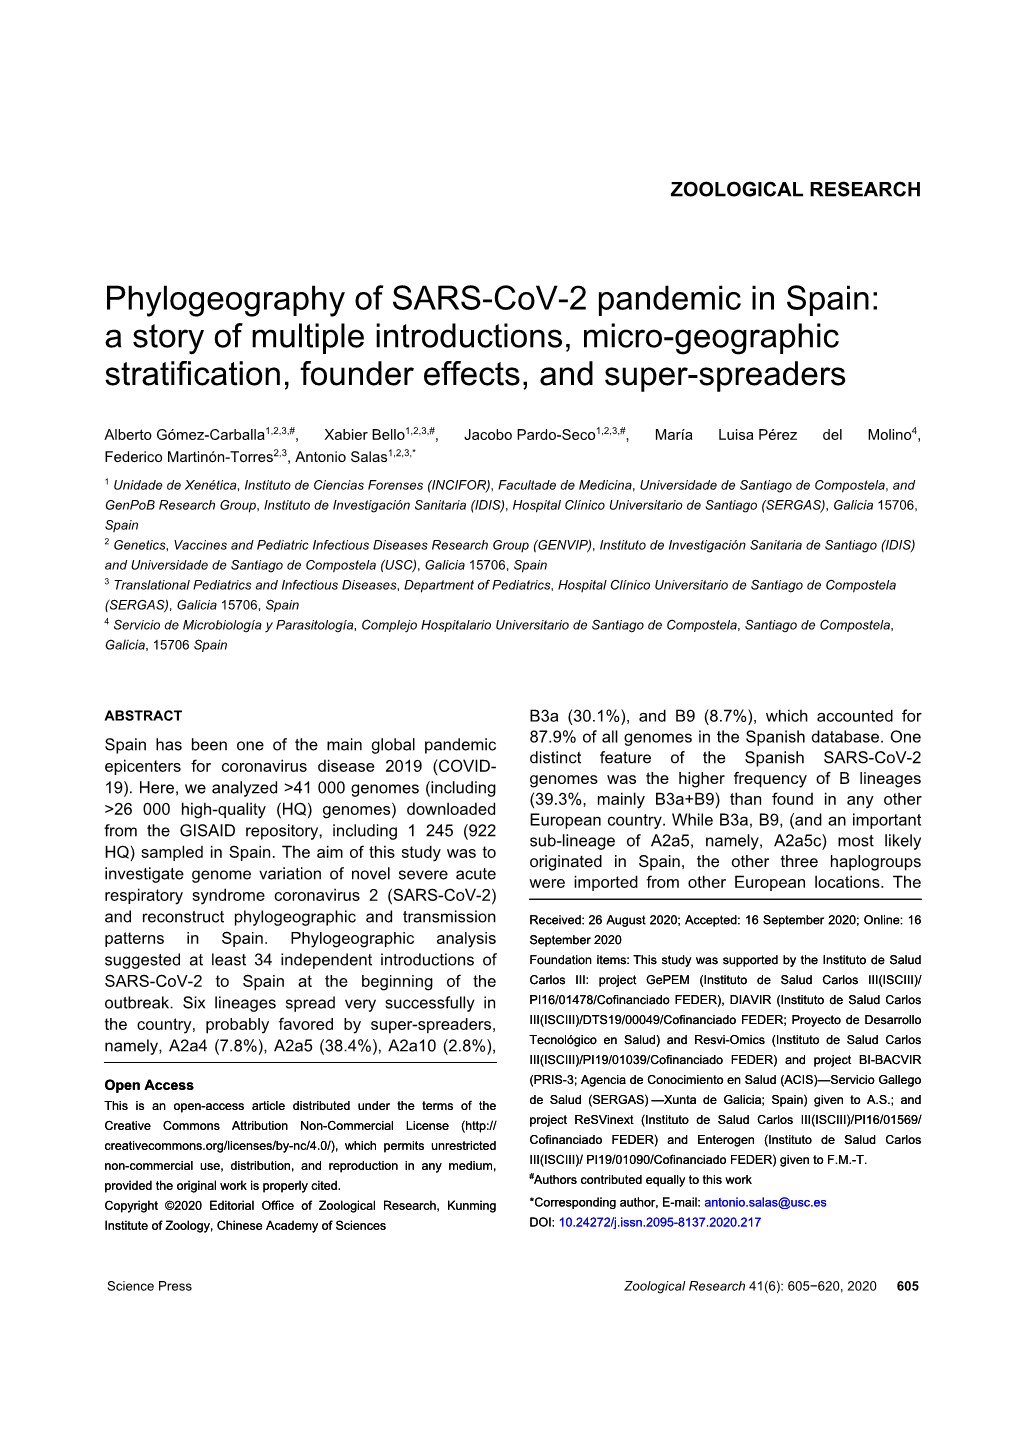 Phylogeography of SARS-Cov-2 Pandemic in Spain: a Story of Multiple Introductions, Micro-Geographic Stratification, Founder Effects, and Super-Spreaders